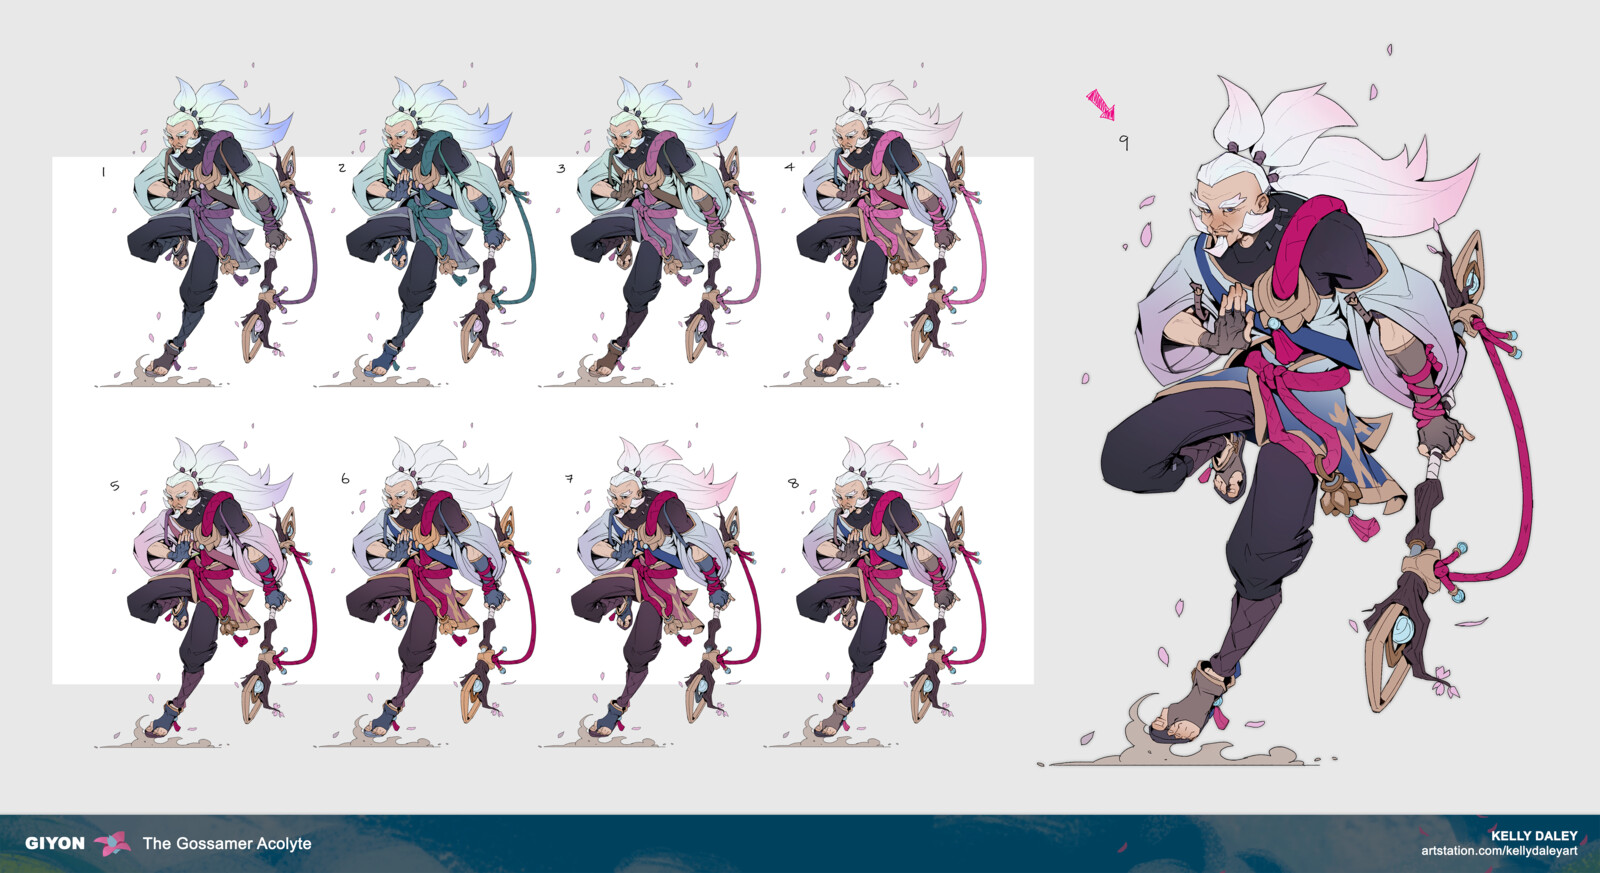 Color exploration. I had a general idea of the color palette he would have. I knew it would be an earthy base combined with sky+cherry blossom colors. Again, I kept the value gradient the same for the sake of readability in a MOBA setting.